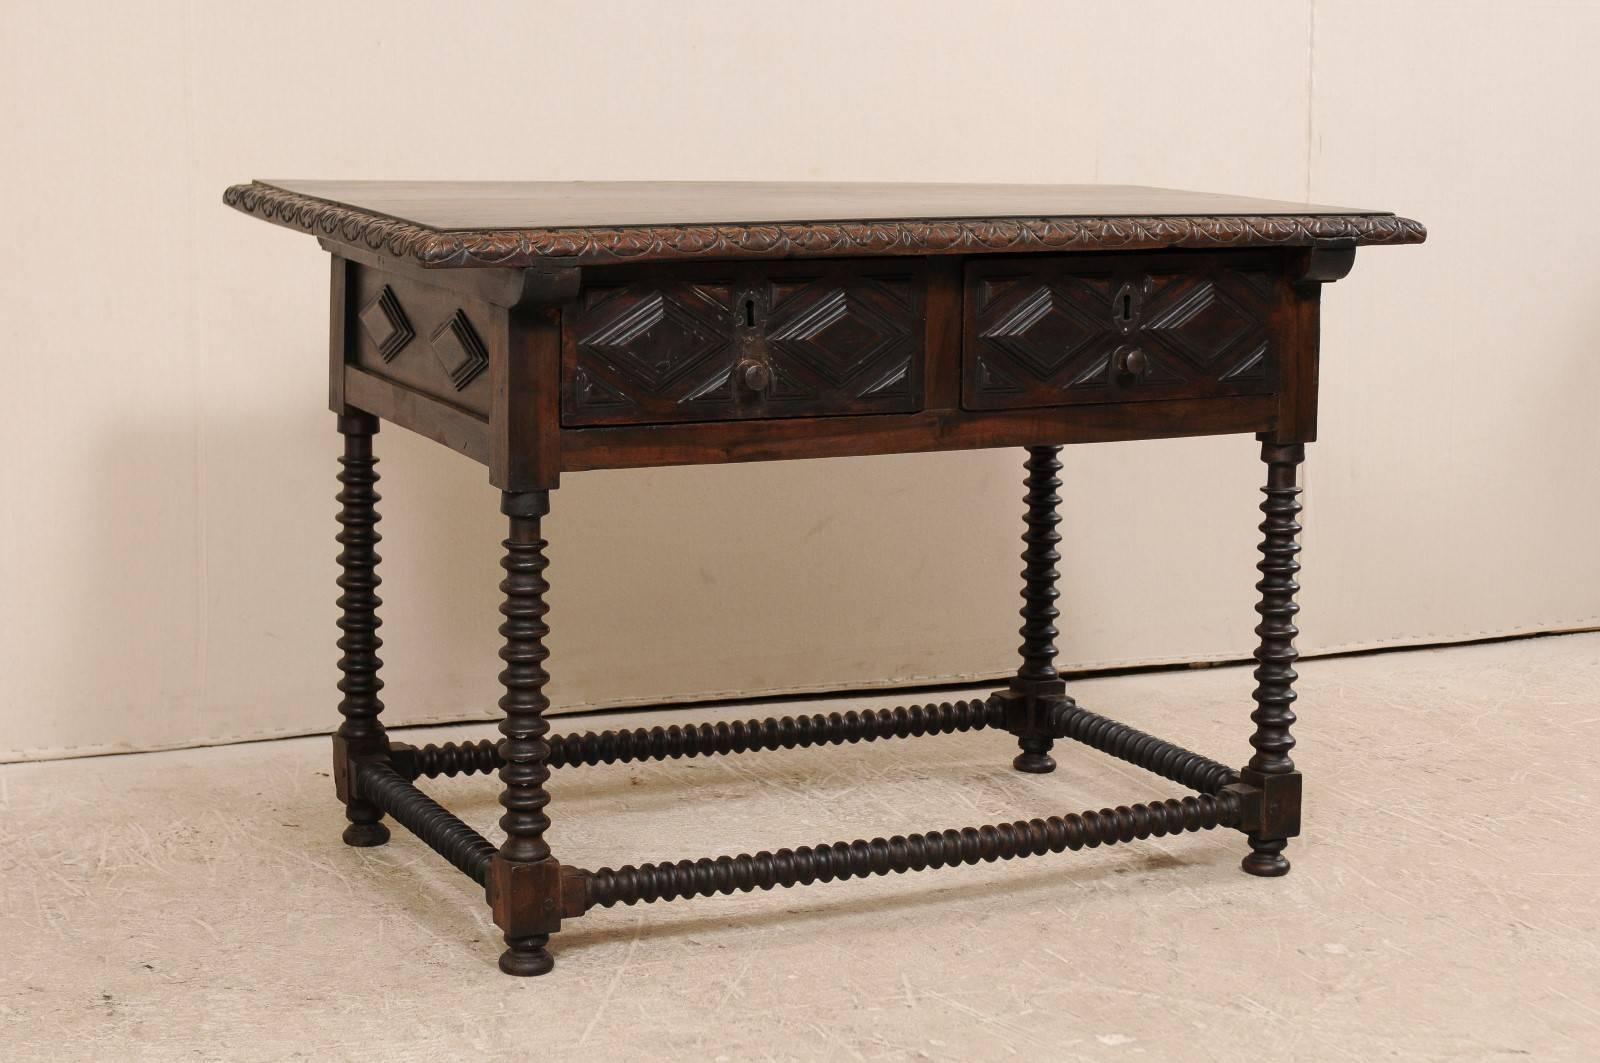 A Spanish early 18th century desk or table. This handsome Spanish desk of walnut features great carving and two large drawers. Amazing carved detail in this desk from the frieze trim around the top to the diamond and geometric carvings along the